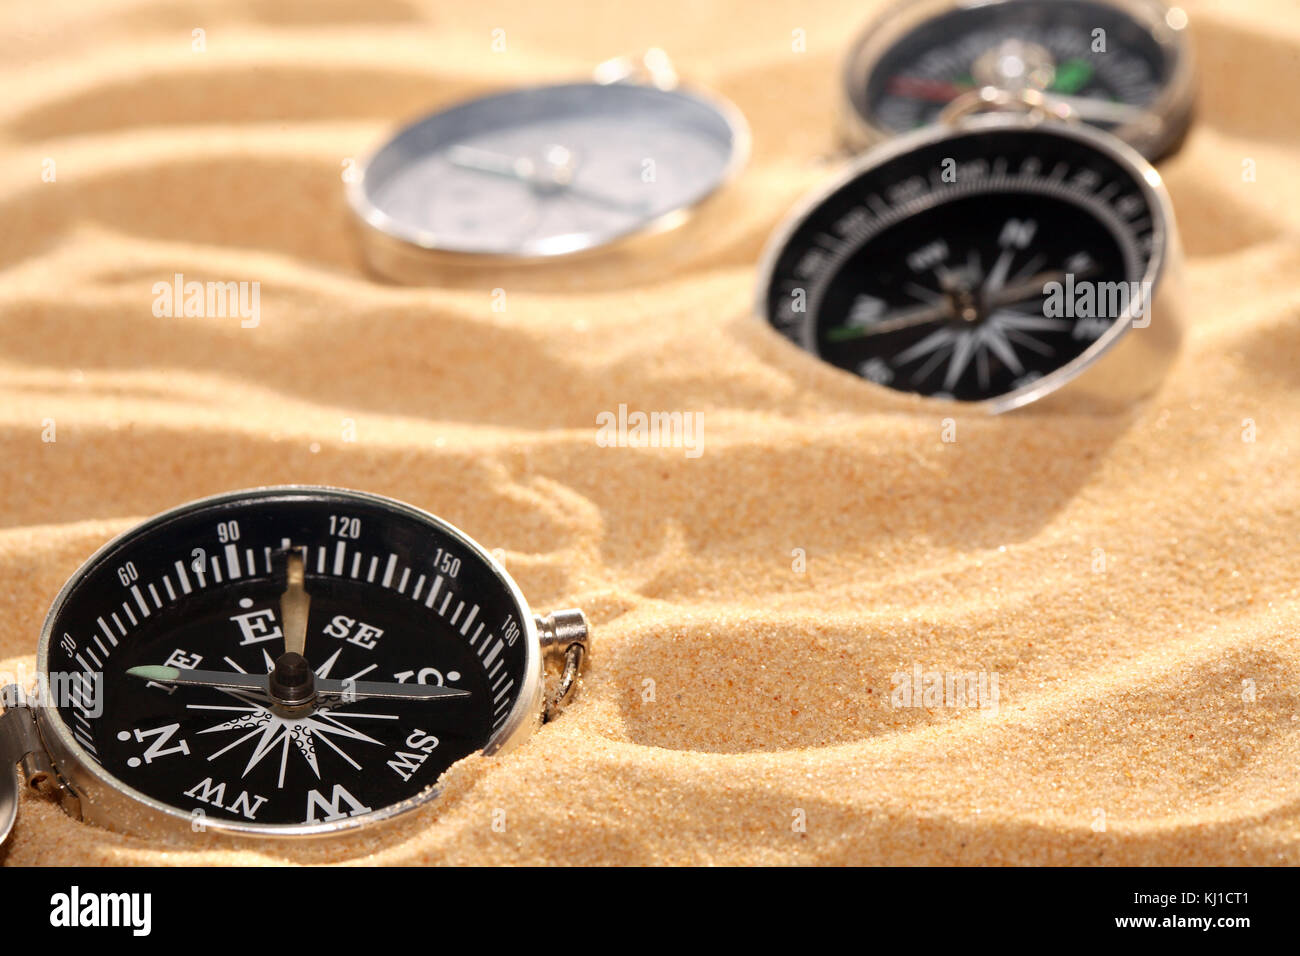 Conceptual background with few compasses lying on sand. Horizontal image Stock Photo